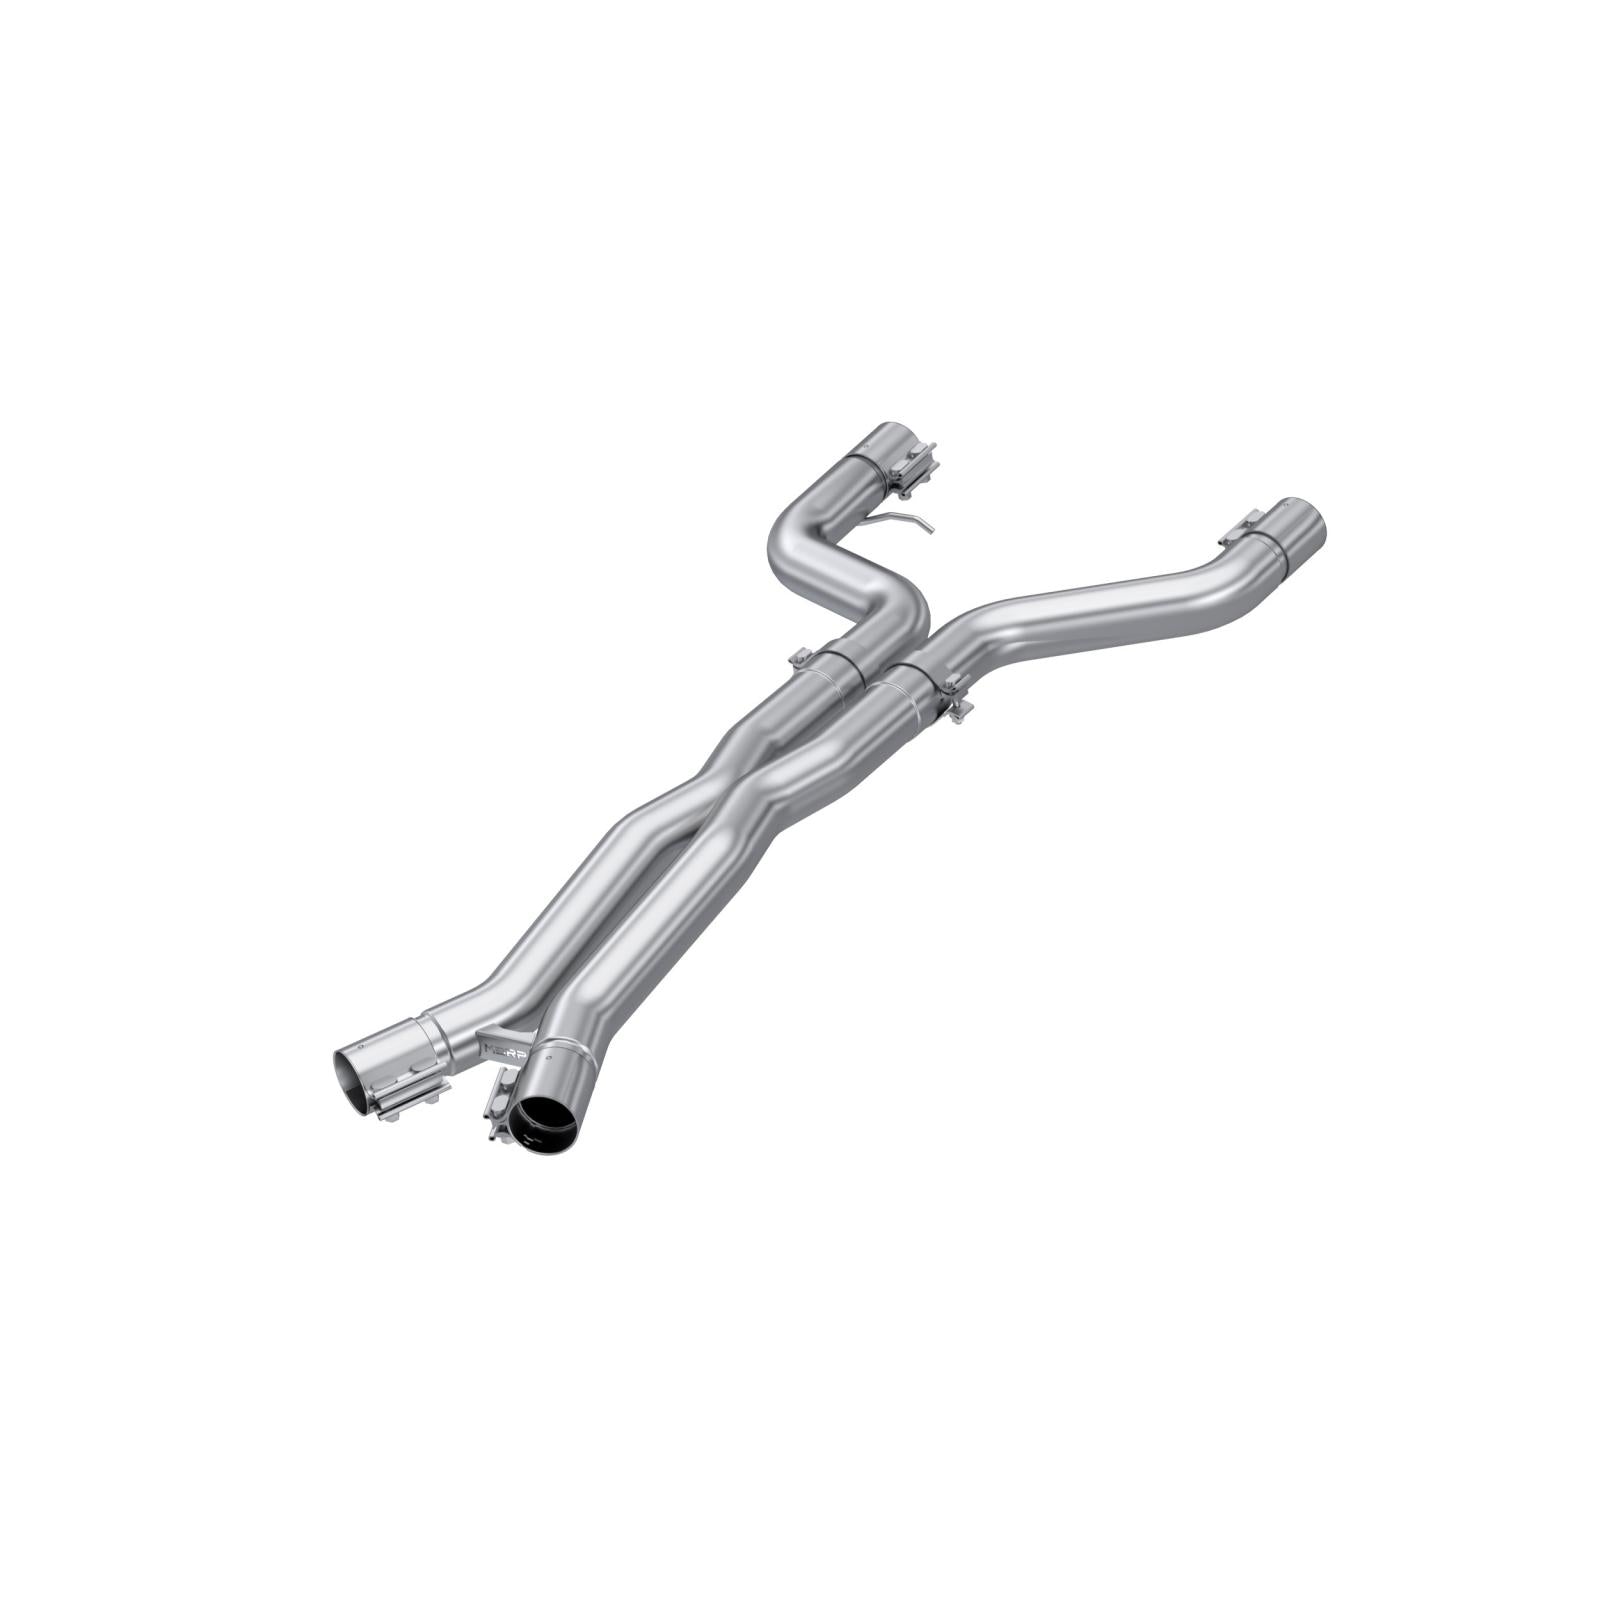 MBRP Exhaust 2021-2023 BMW M4 G82/ M3 G80 3.0L Coupe and Sedan T304 Stainless Steel 3 Inch Resonator Bypass X-Pipe MBRP S4501304